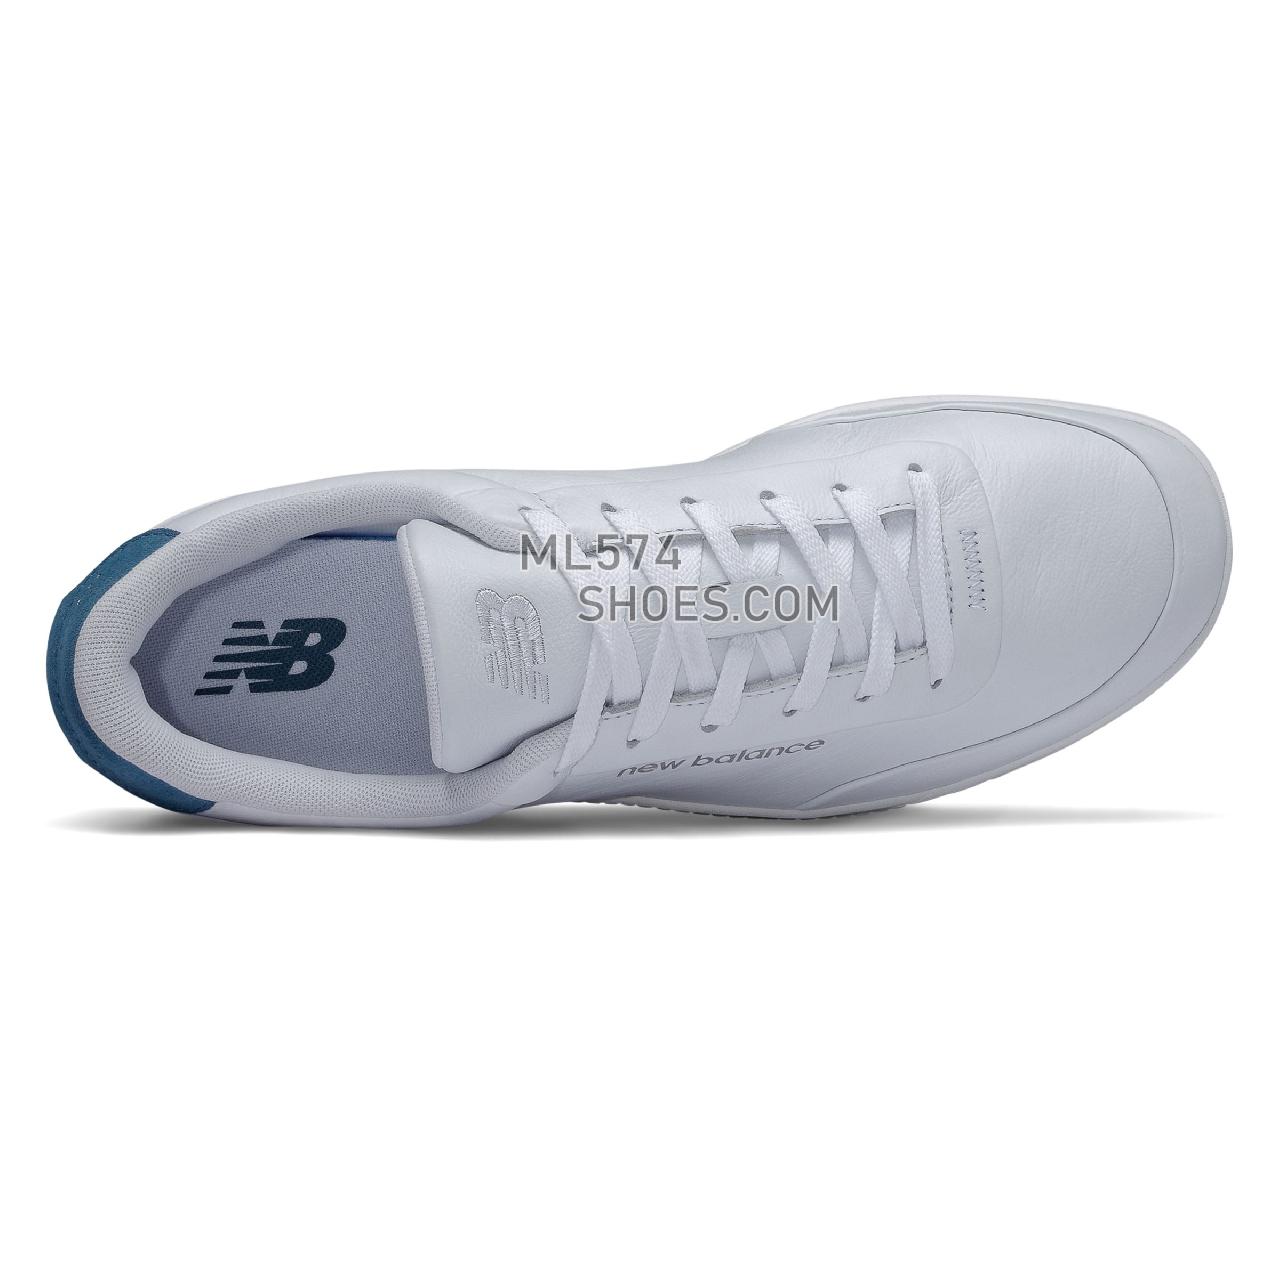 New Balance CT Alley - Men's Classic Sneakers - White with Blue - CTALYMAC